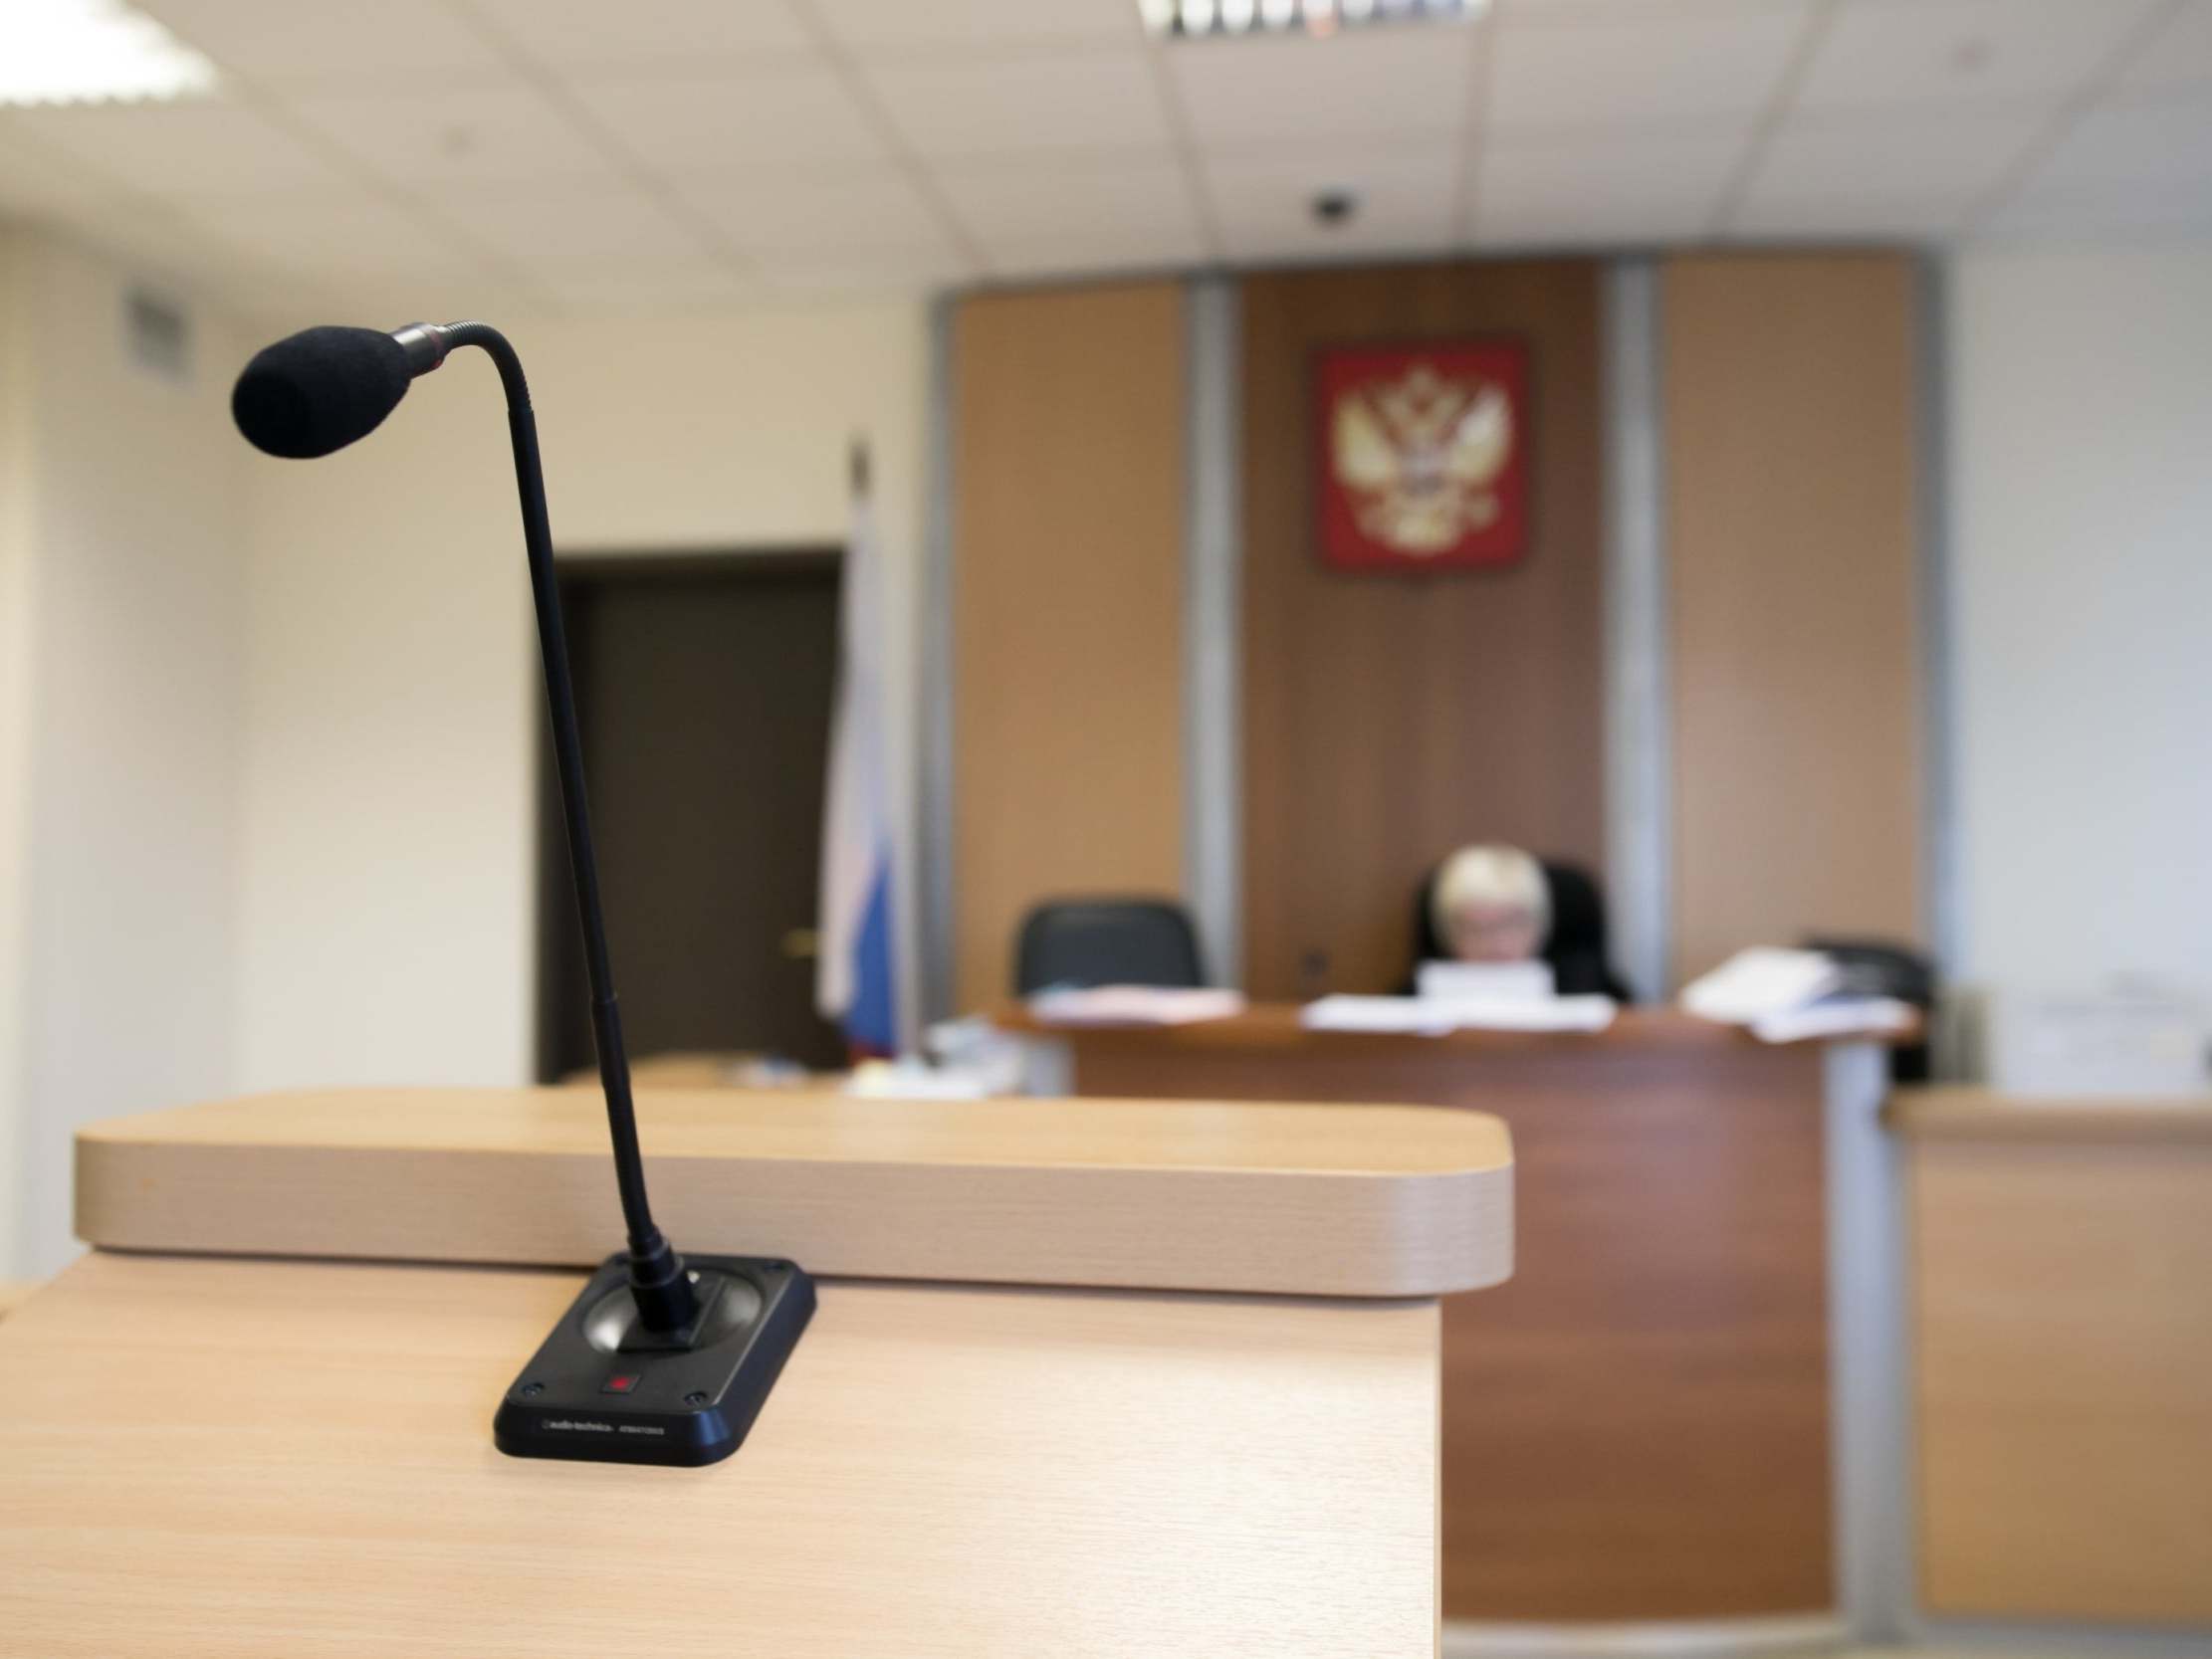 Russian courts are, in the vast majority of instances, highly predictable affairs